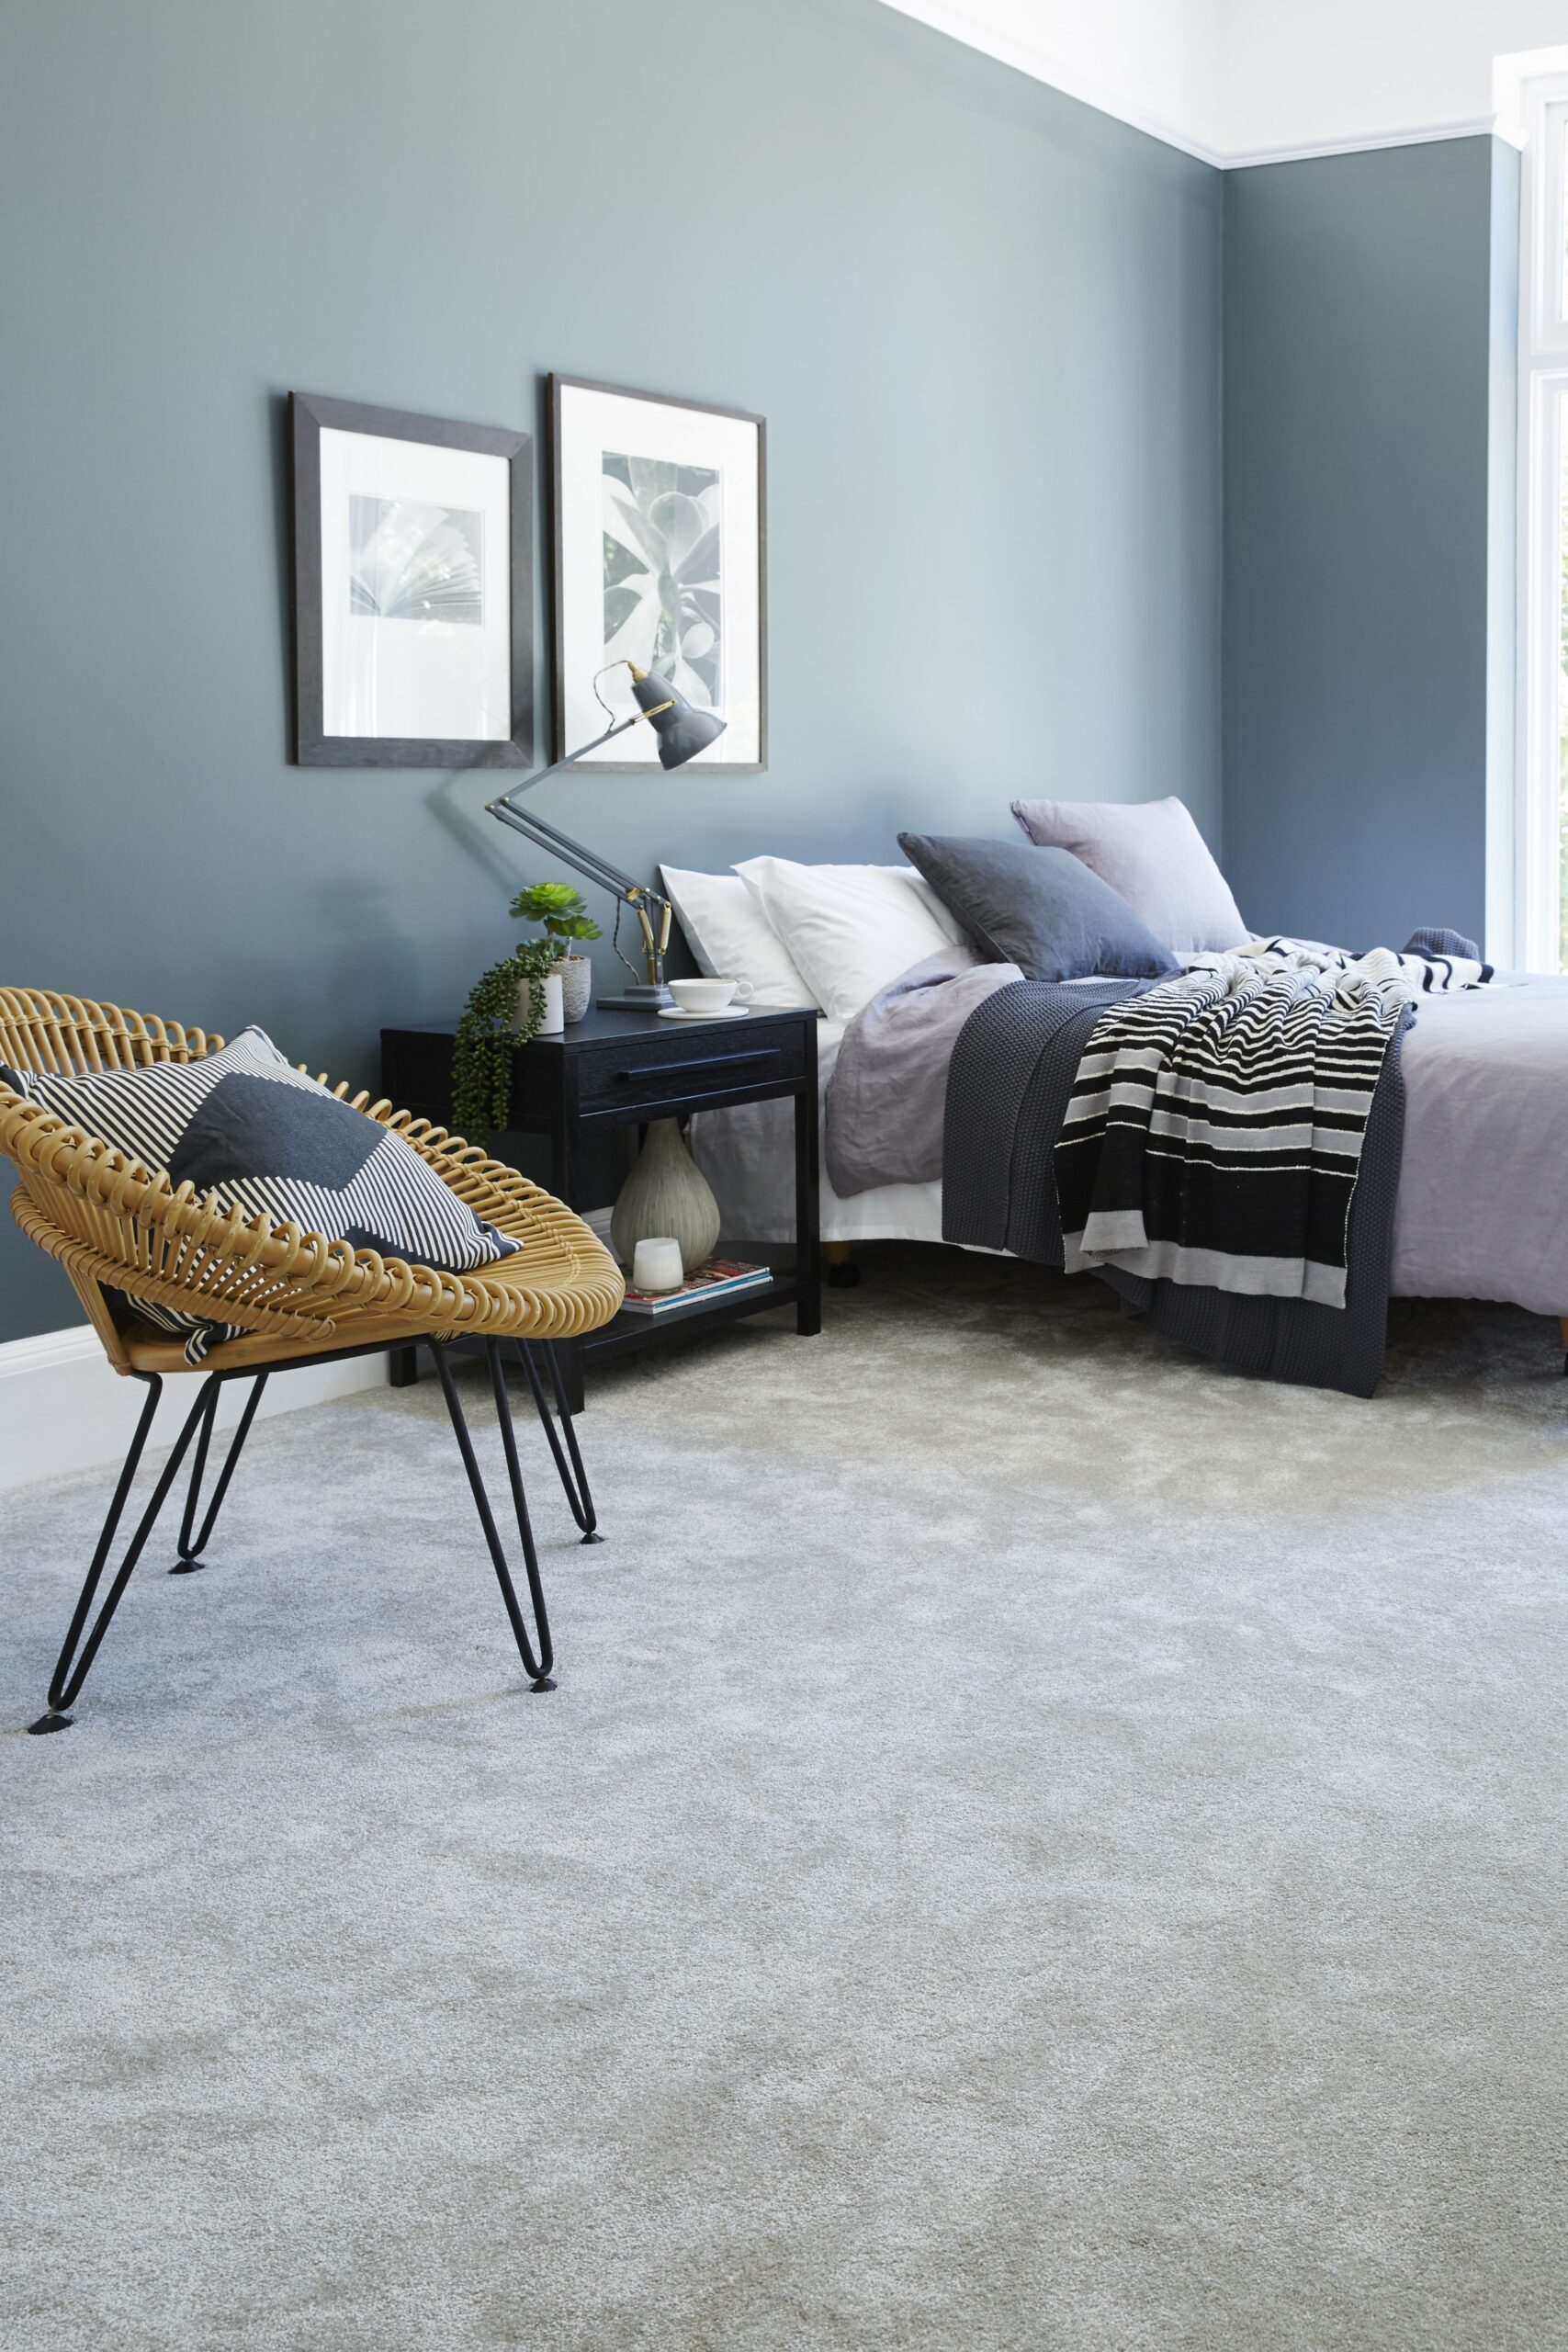 Bedroom Carpets: Stunning And Useful   